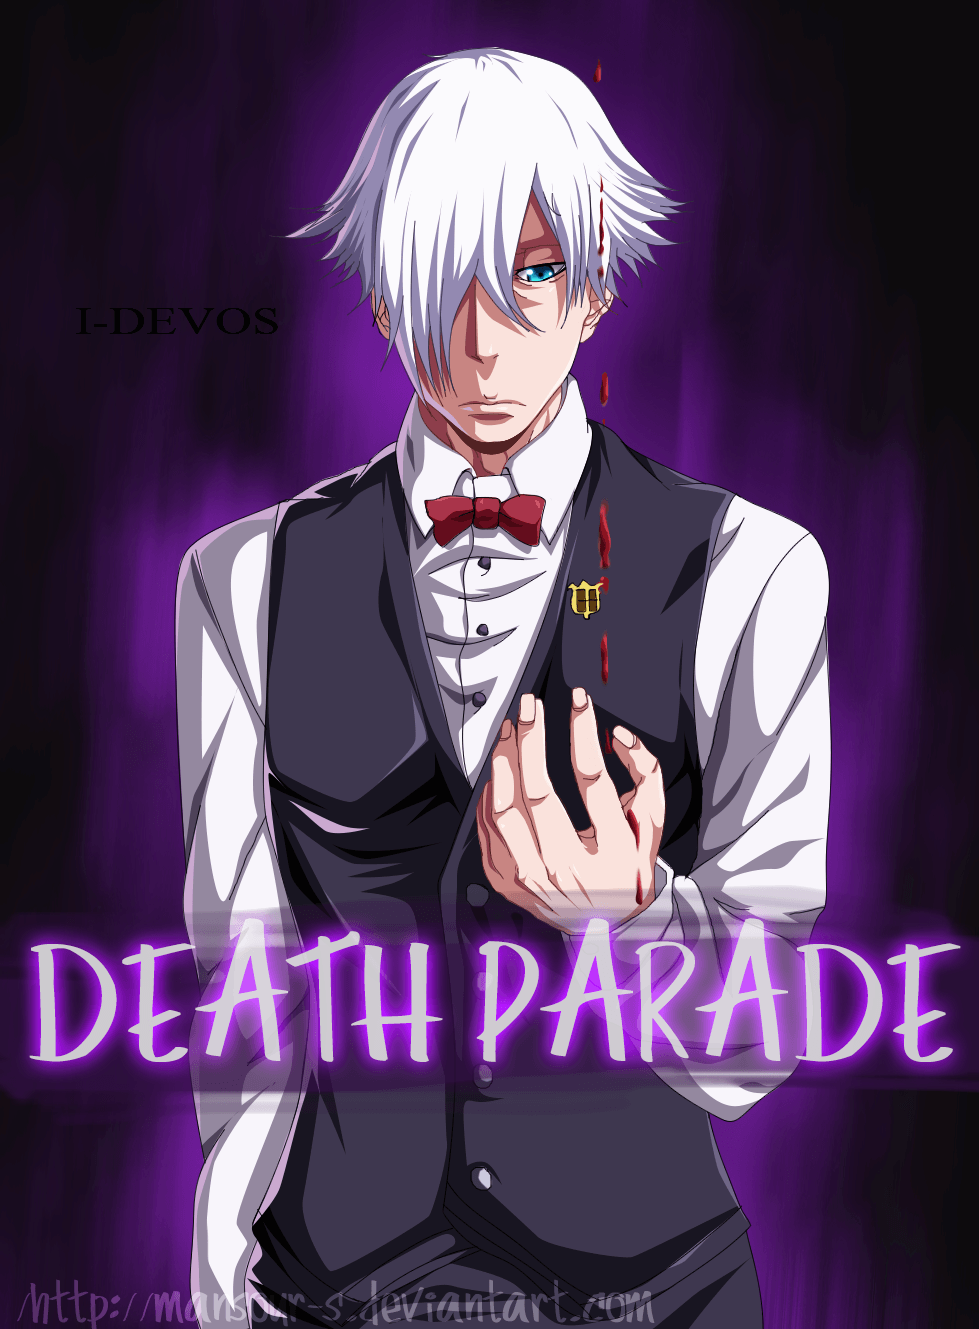 What is the connection between death note and death parade  Quora